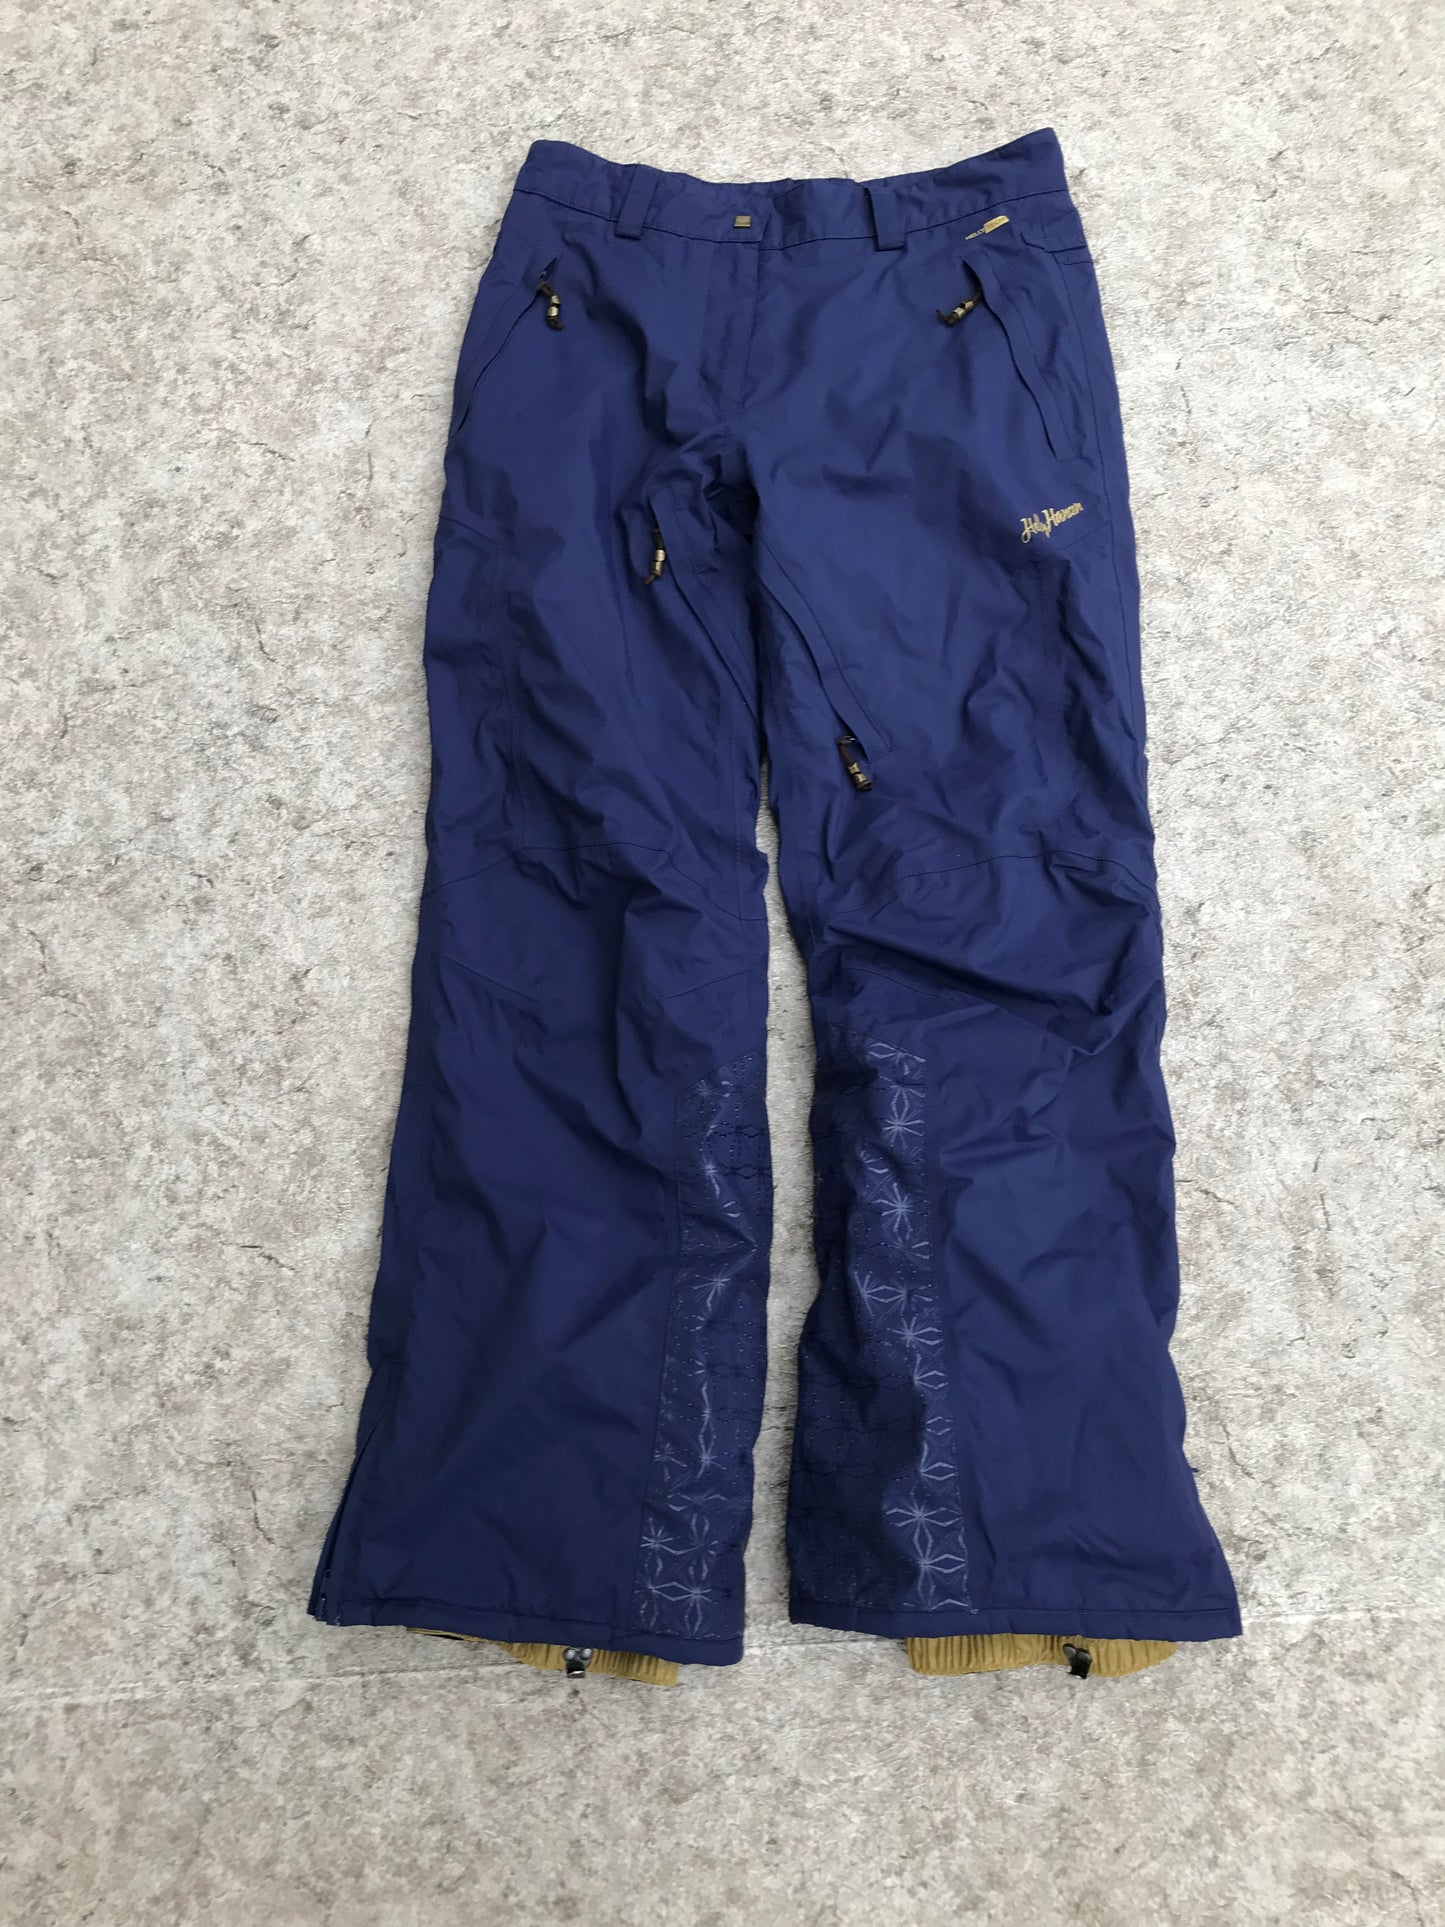 Snow Pants Ladies Size Medium Helly Hansen Purple Gold Snow and Water Proof New Demo Model